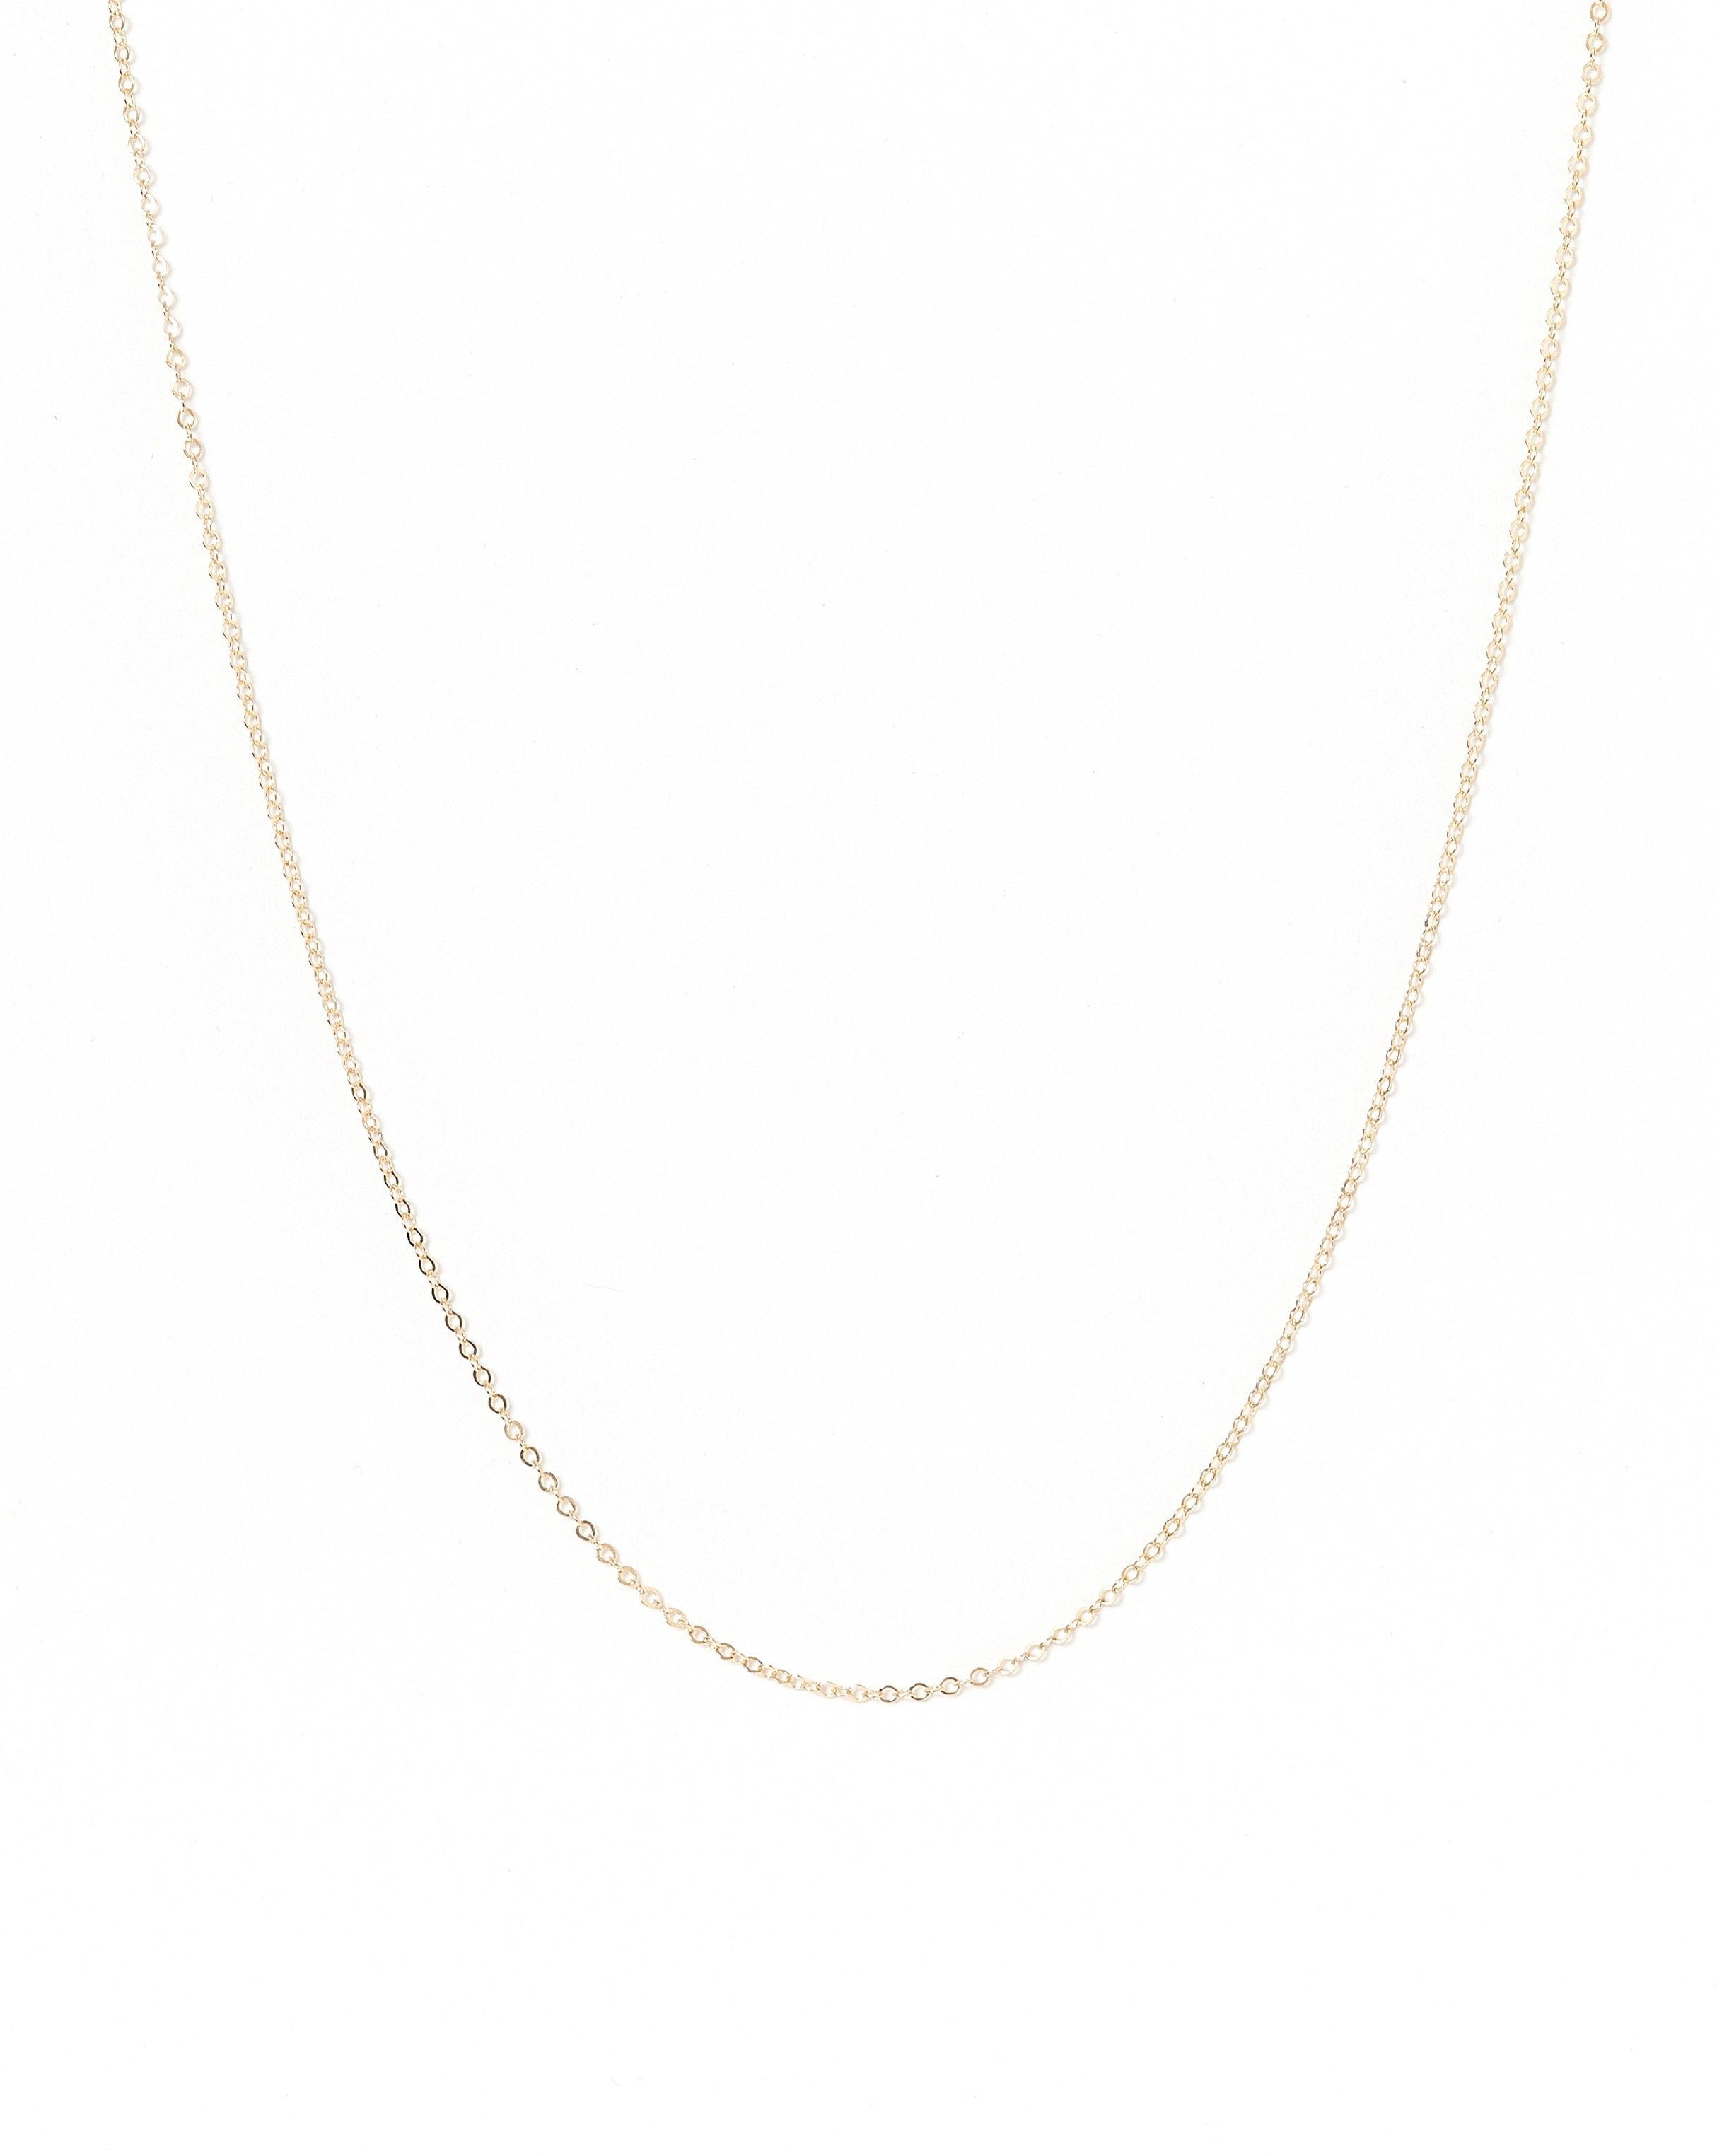 Gold Chain by KOZAKH. A 14K Gold Filled handcrafted minimalist chain necklace, available in 4 adjustable lengths.